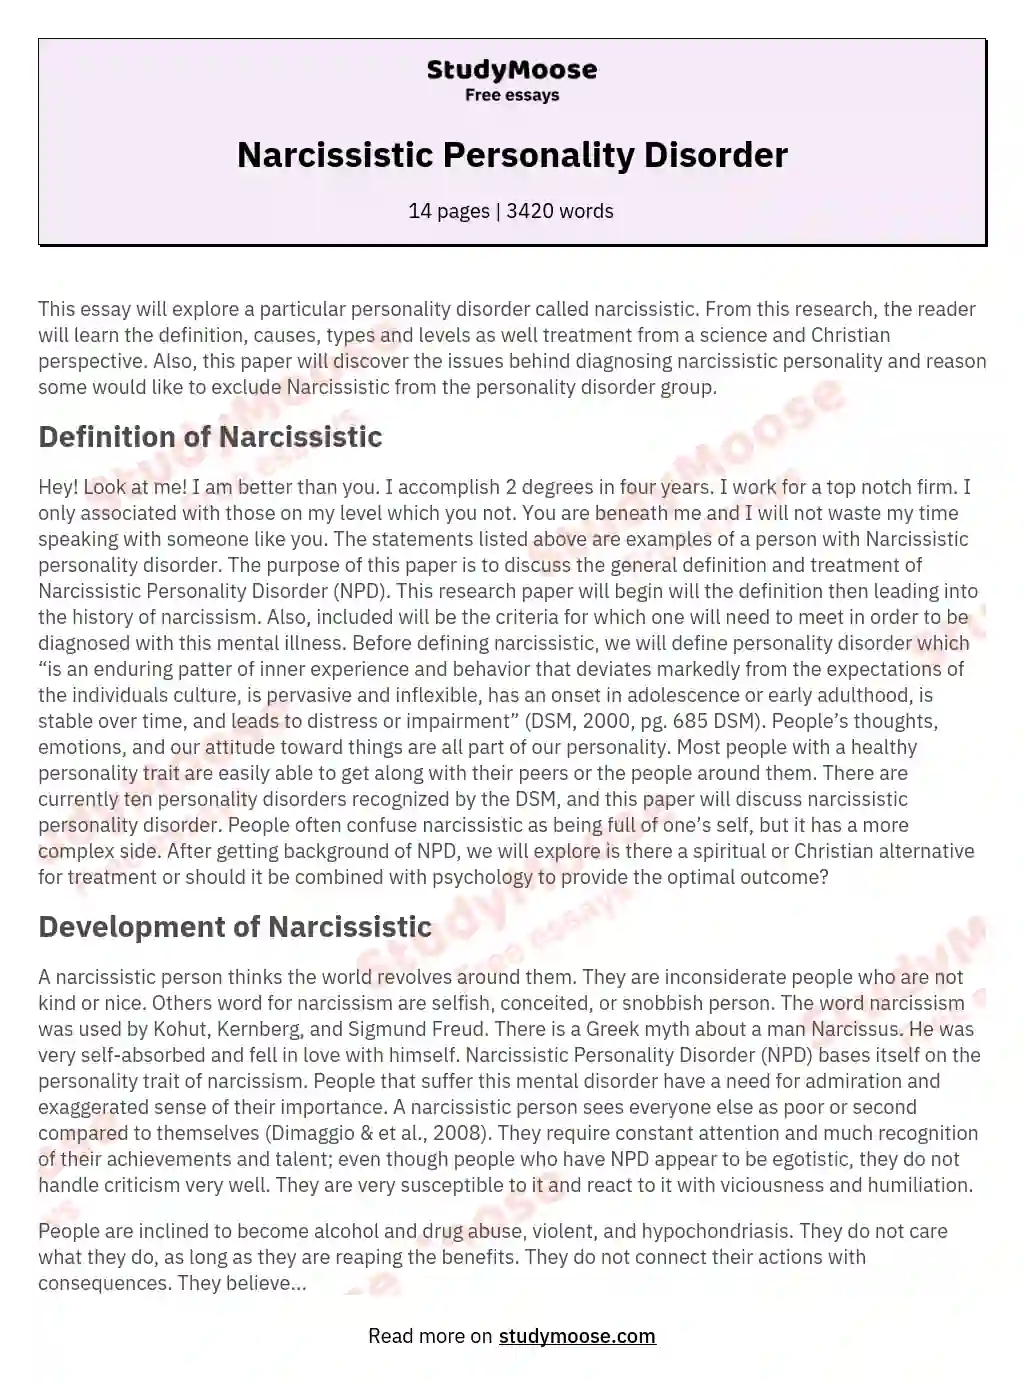 case study of a narcissistic personality disorder